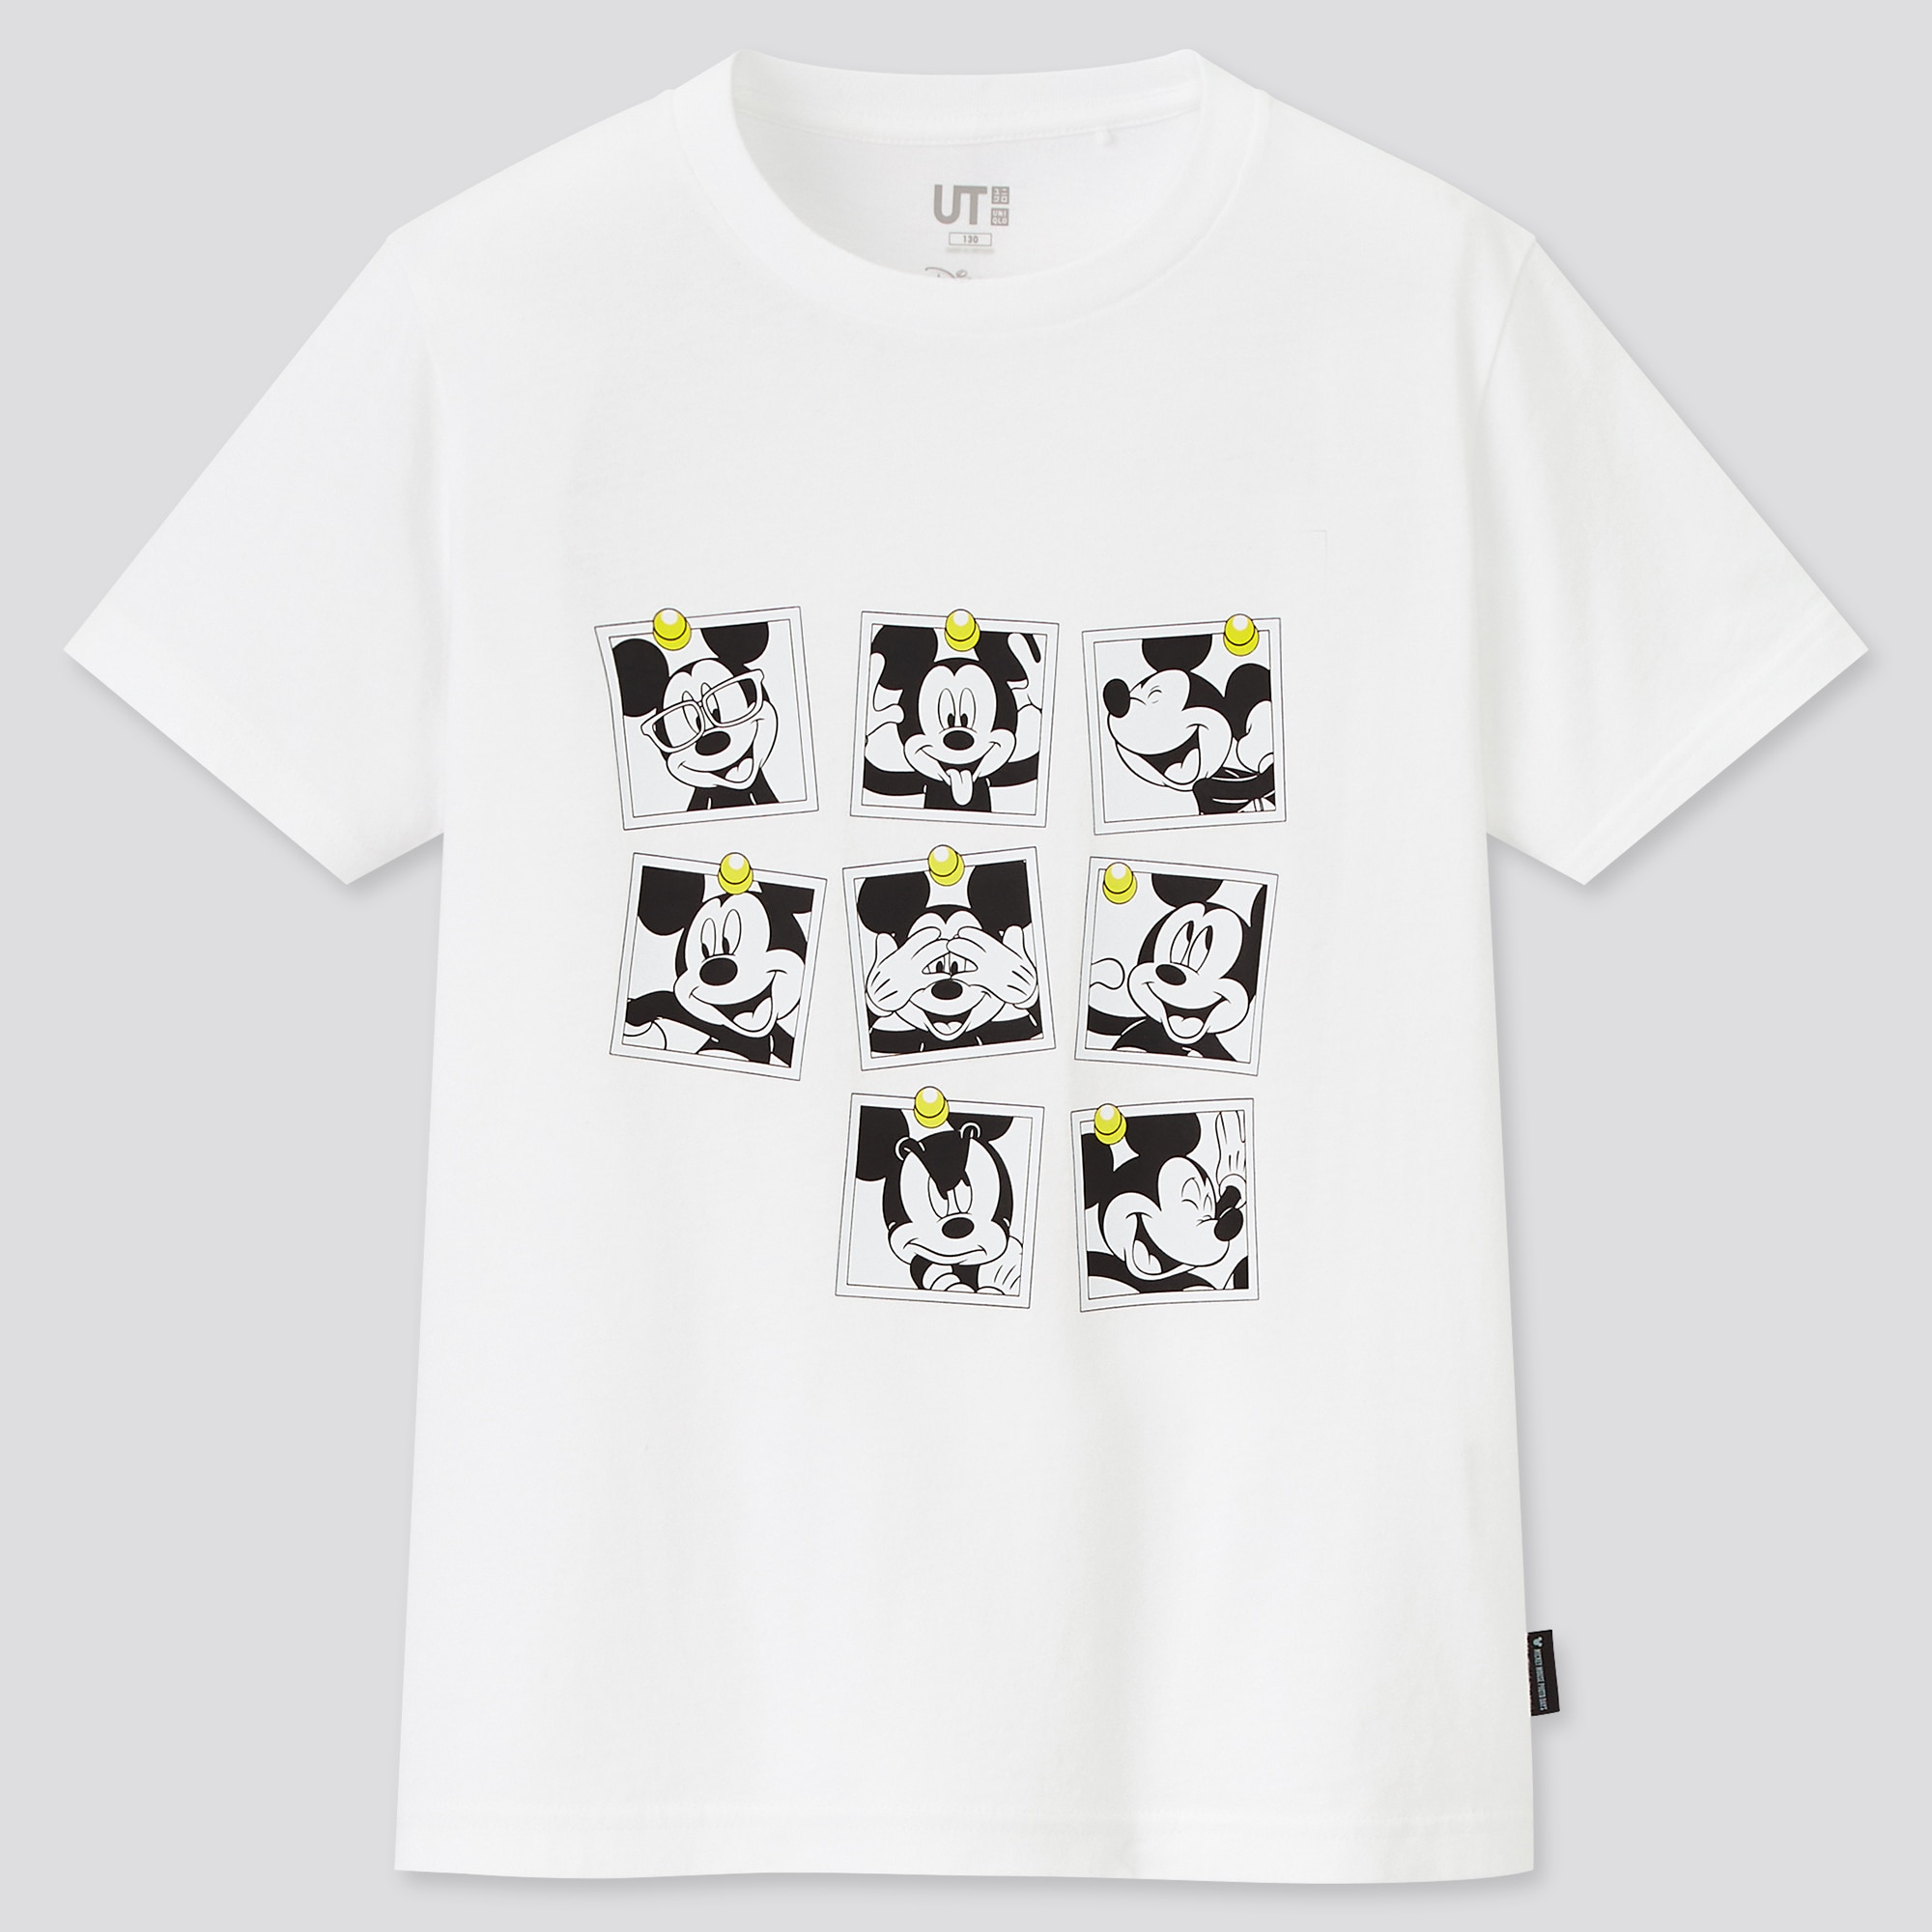 Uniqlo UT Mickey Stands Tees Coming to PH Official Details